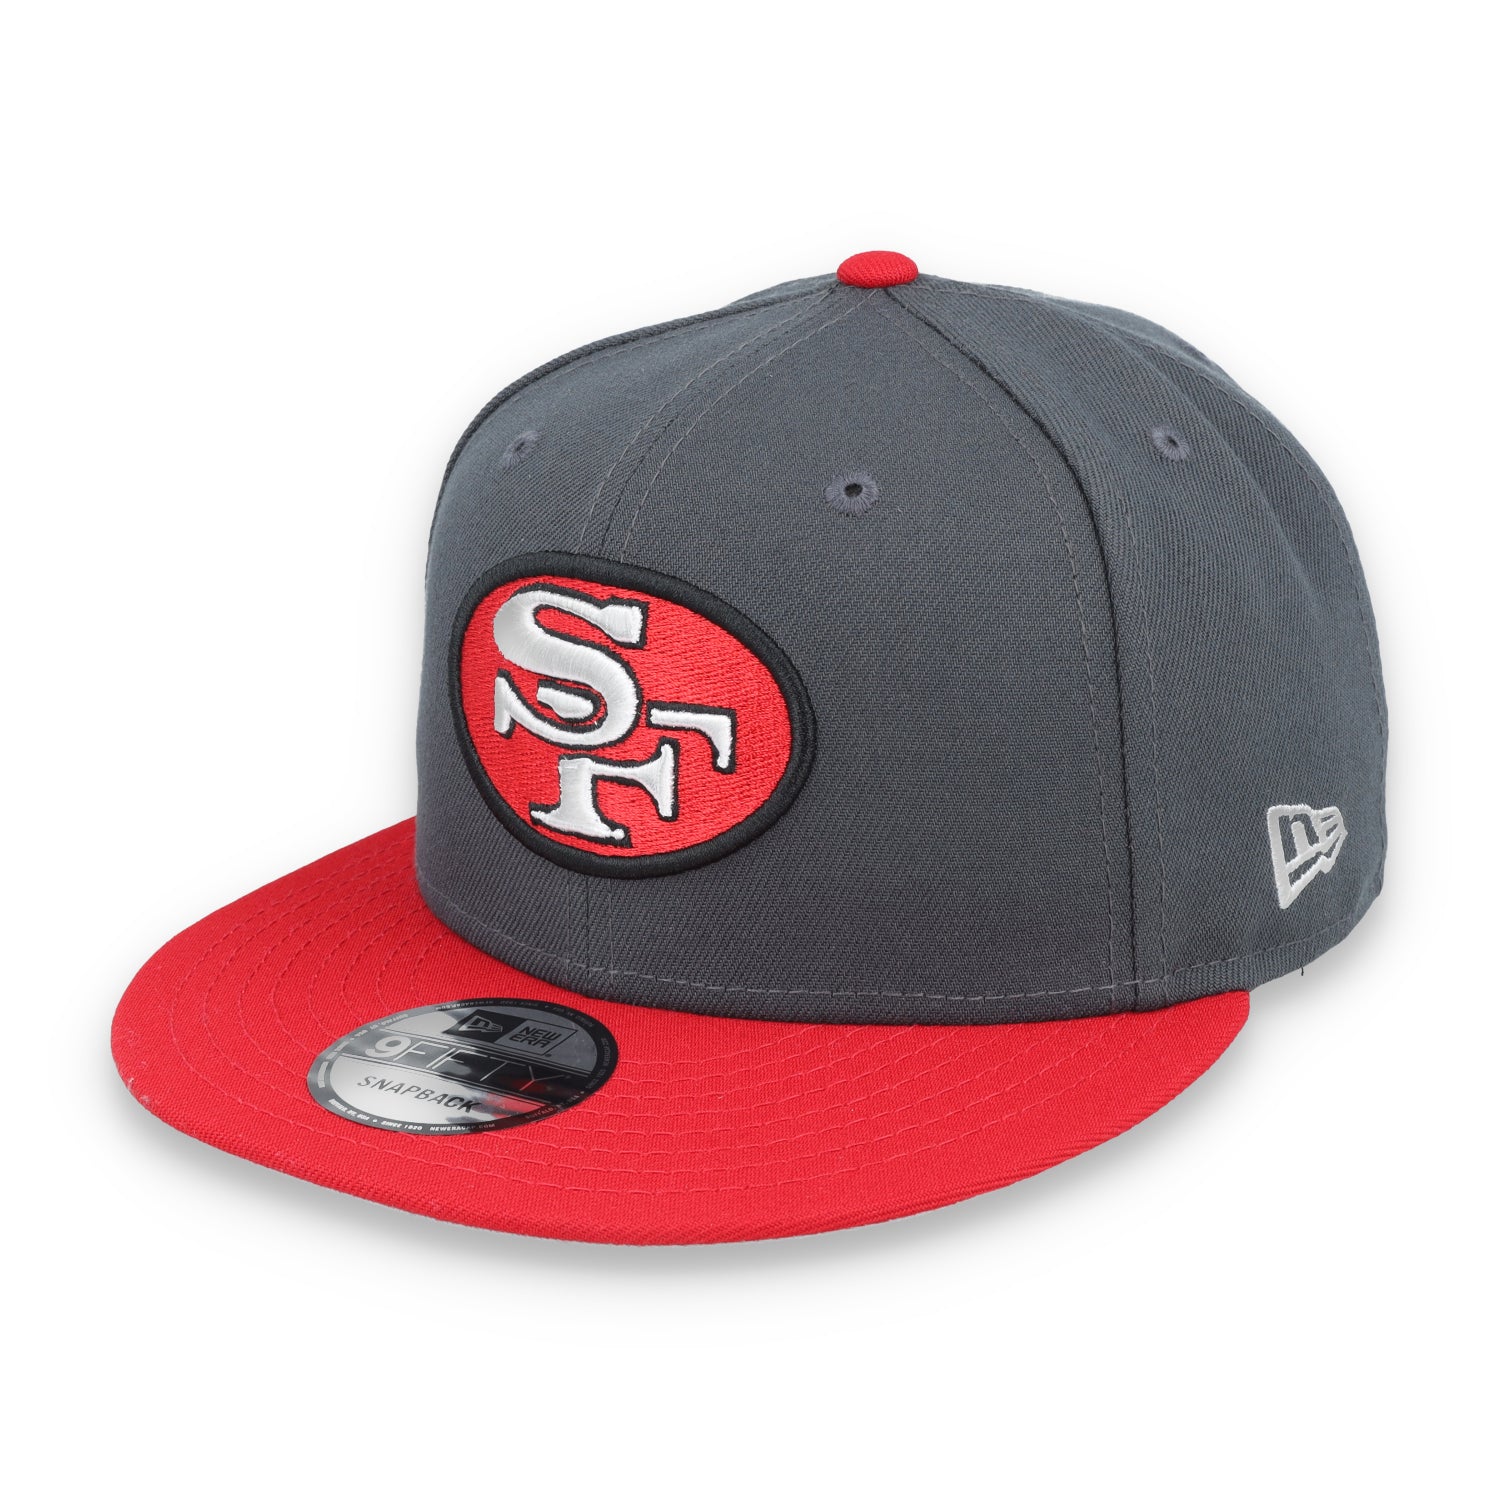 New Era San Francisco 49ers 2-Tone Color Pack 9FIFTY Snapback Hat-Grey/Scarlet/White